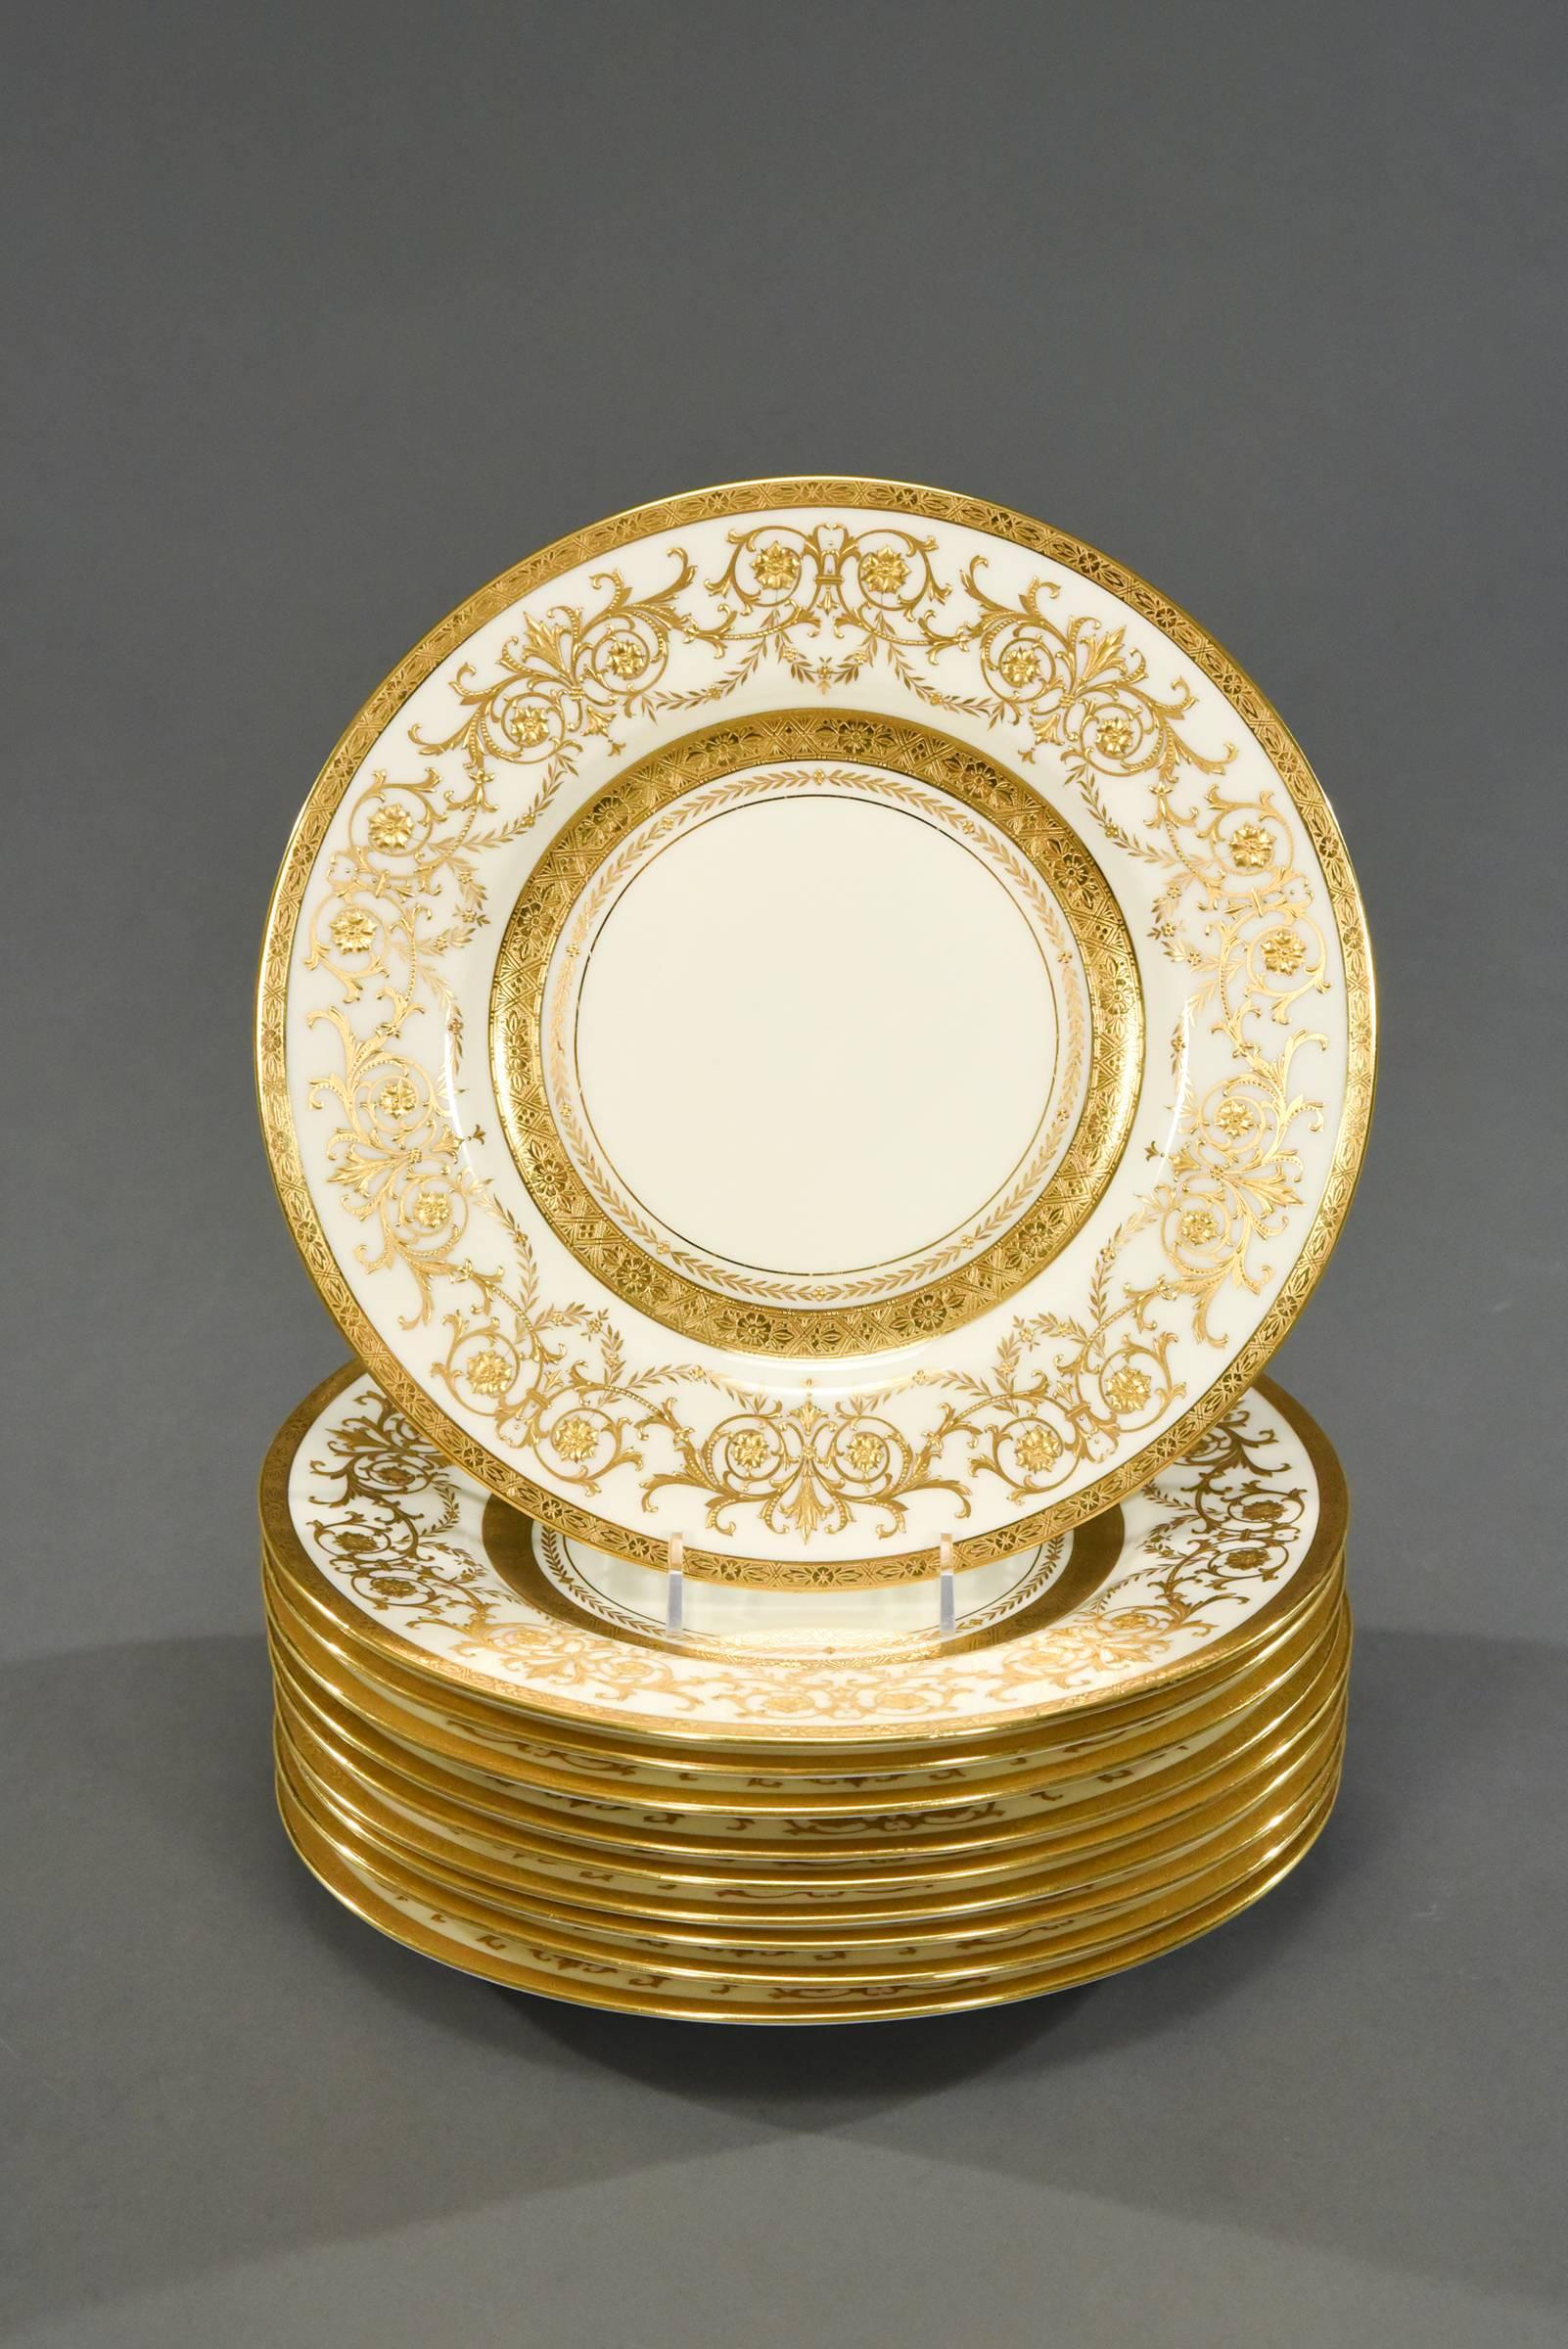 This set of ten magnificent Minton plates can be used as dinner plates and service or presentation plates and will set the most elegant table imaginable. Exclusive to Tiffany and Co, these were considered 